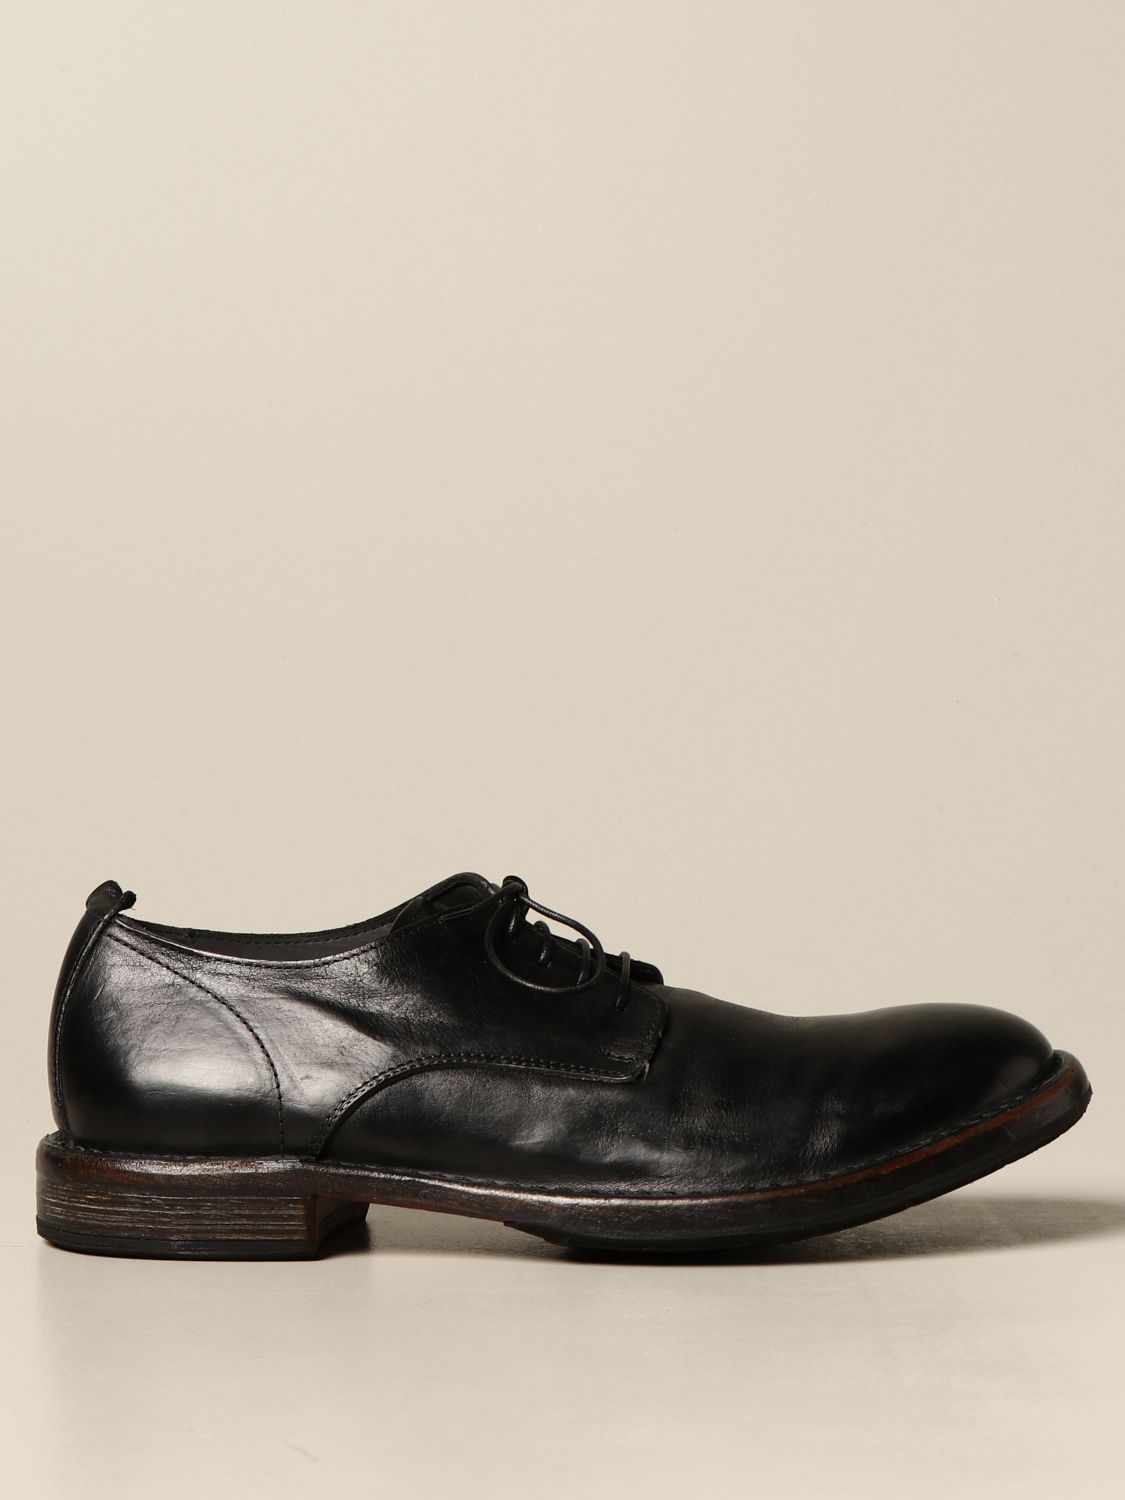 Schurk inkt Vruchtbaar Moma Outlet: brogue shoes for man - Black | Moma brogue shoes 2AW003 online  on GIGLIO.COM